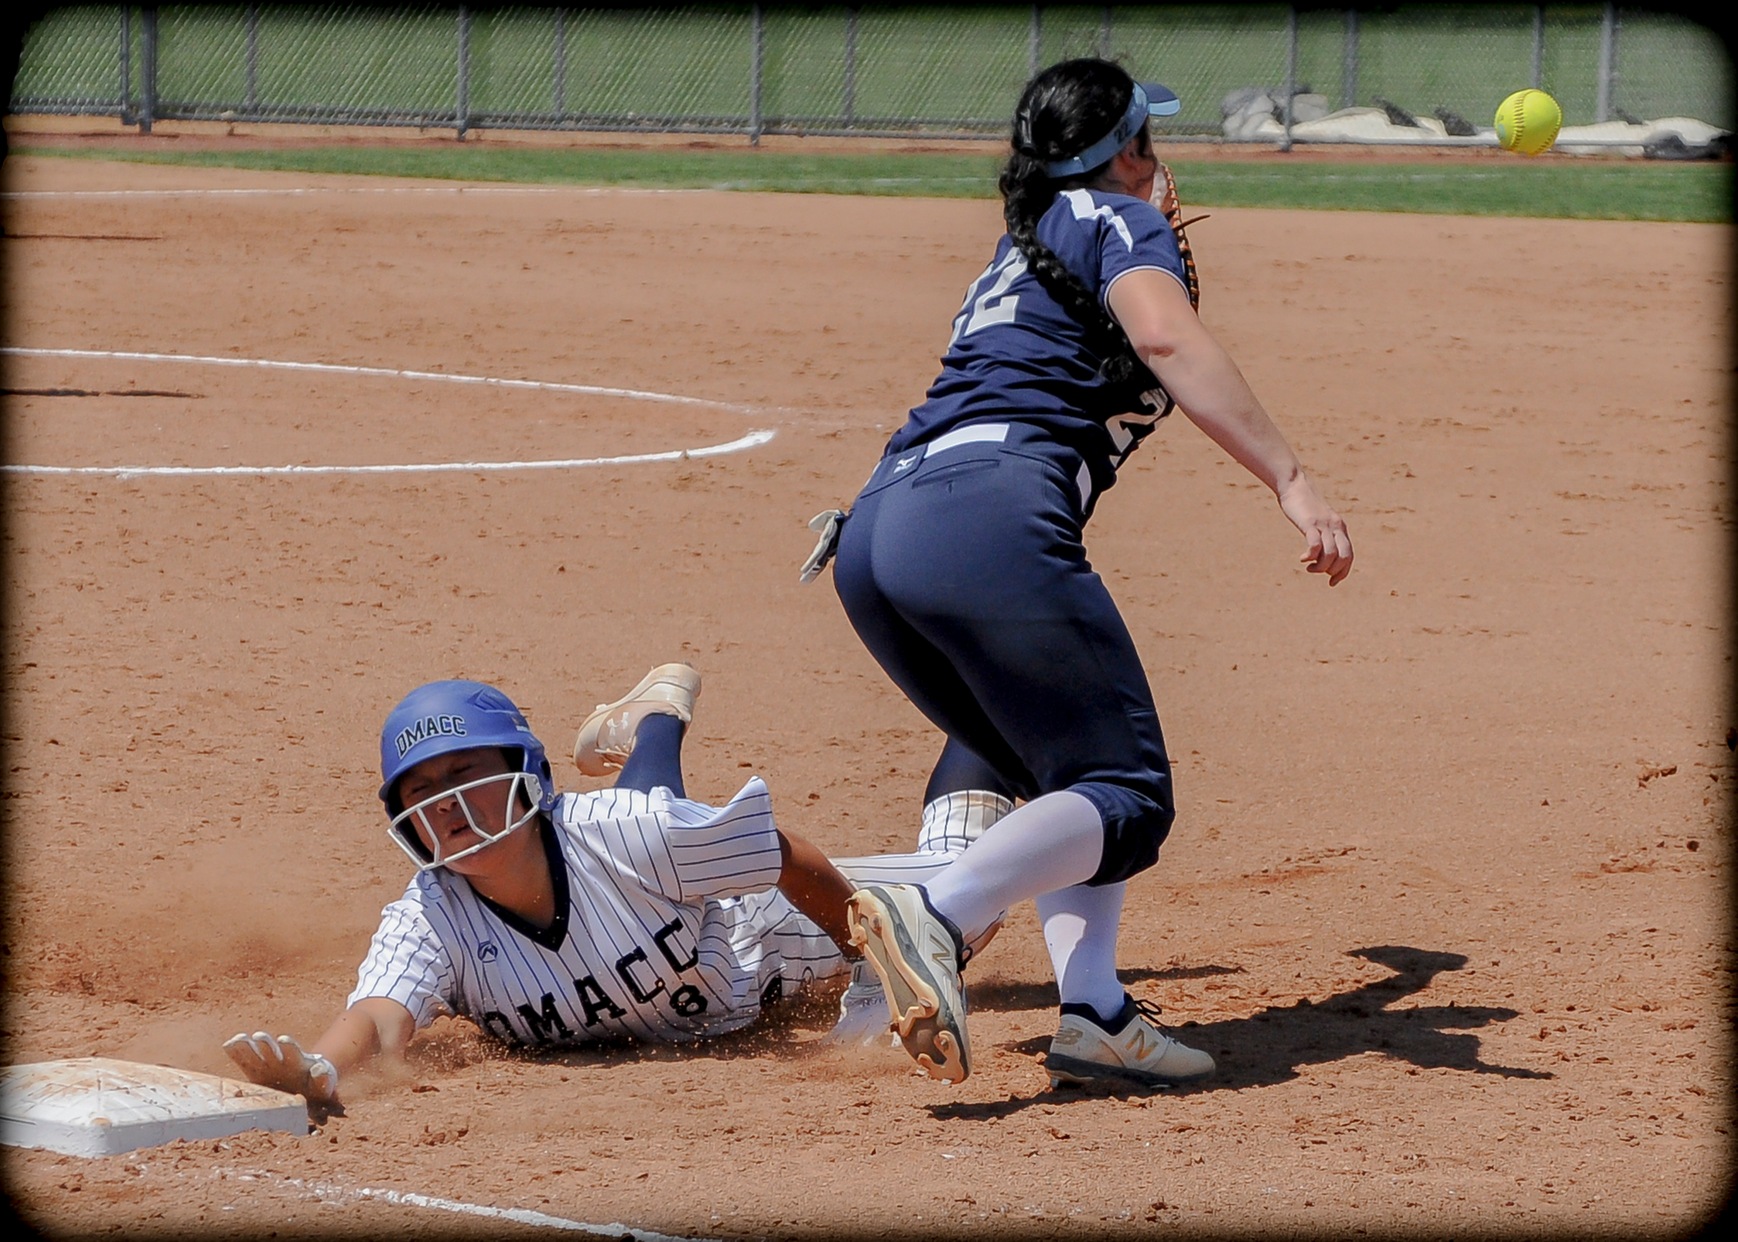 Swafford pitches, bats DMACC softball team to tournament-opening victory